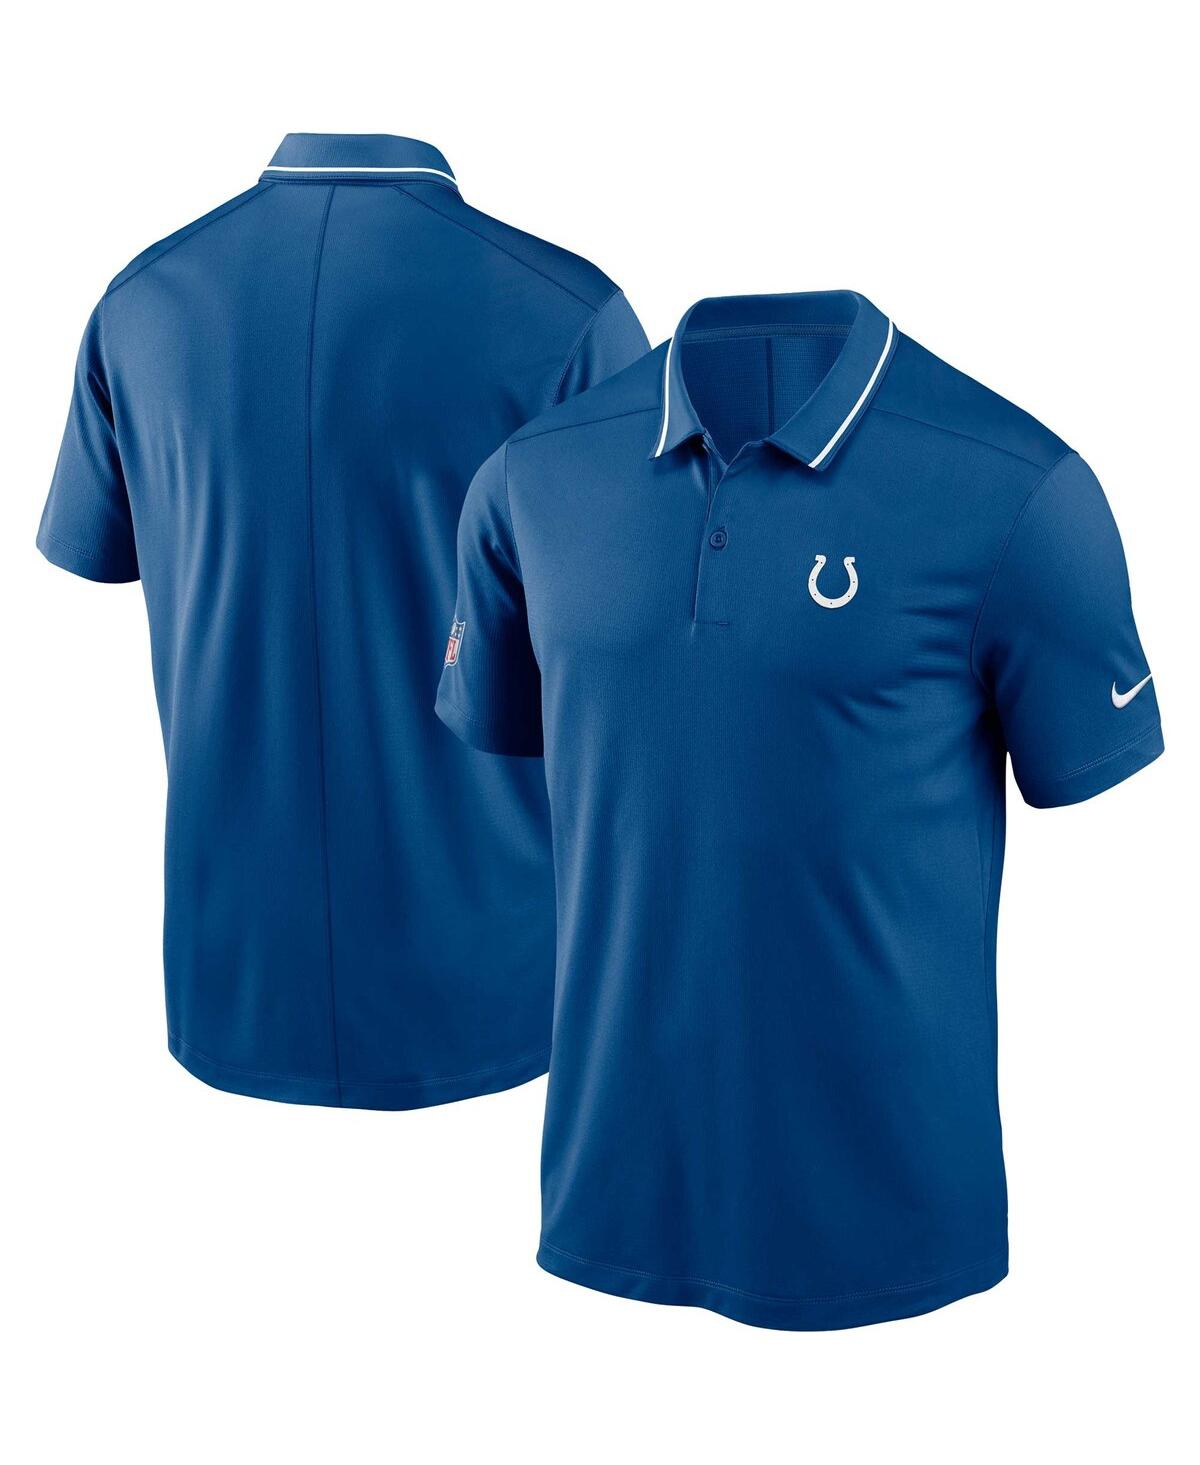 NIKE MEN'S NIKE ROYAL INDIANAPOLIS COLTS SIDELINE VICTORY PERFORMANCE POLO SHIRT